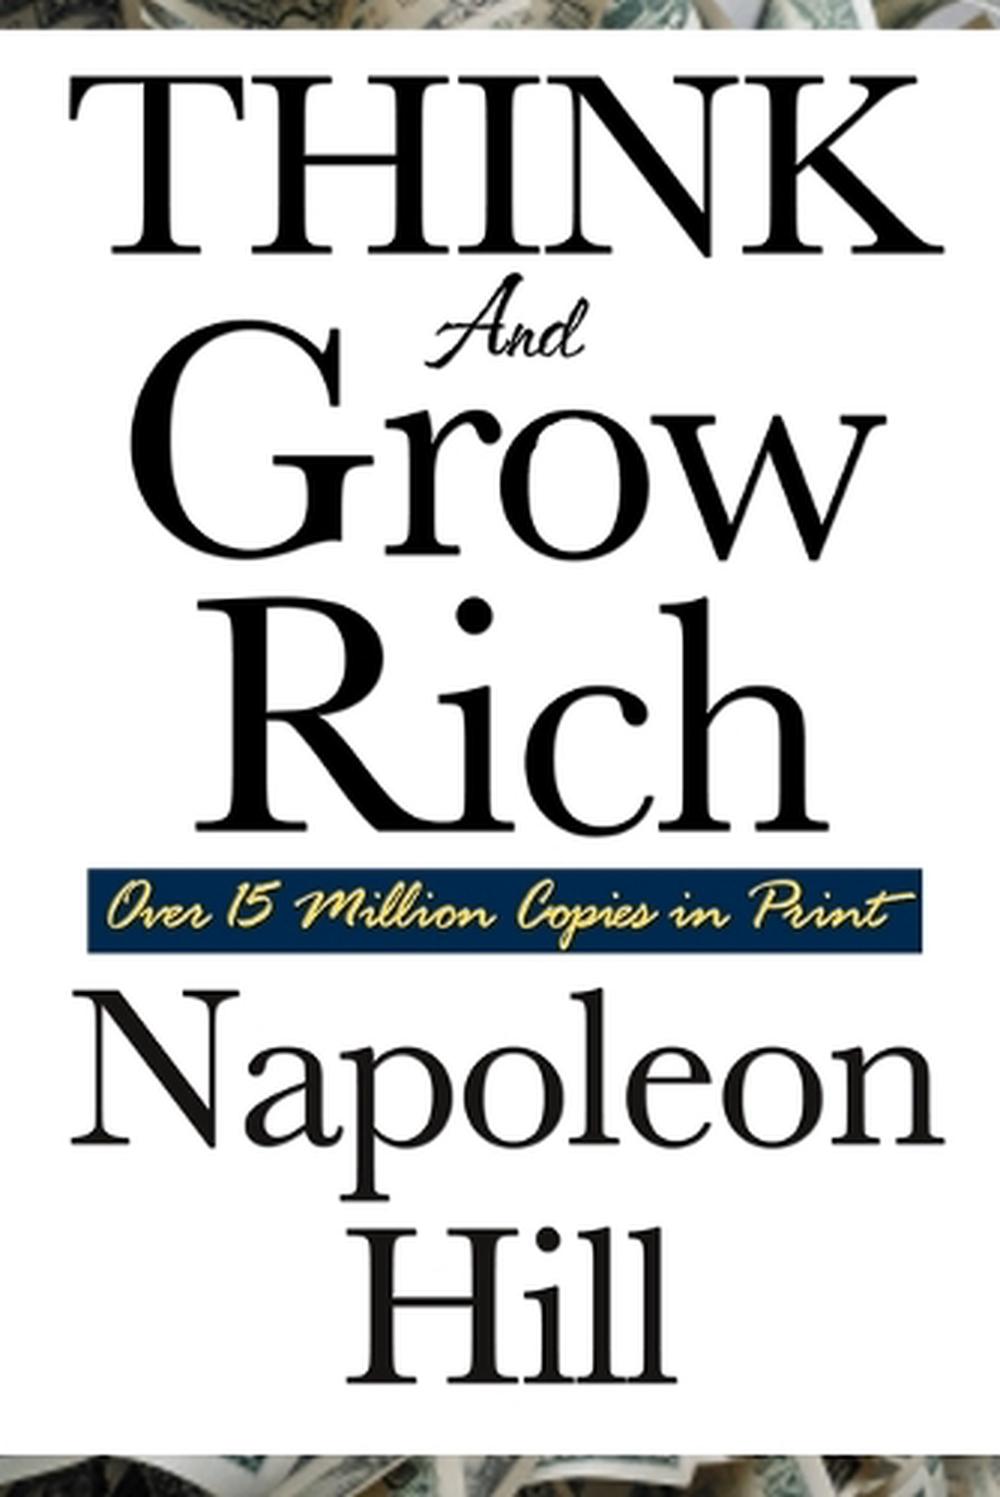 Think and Grow Rich download the new for windows